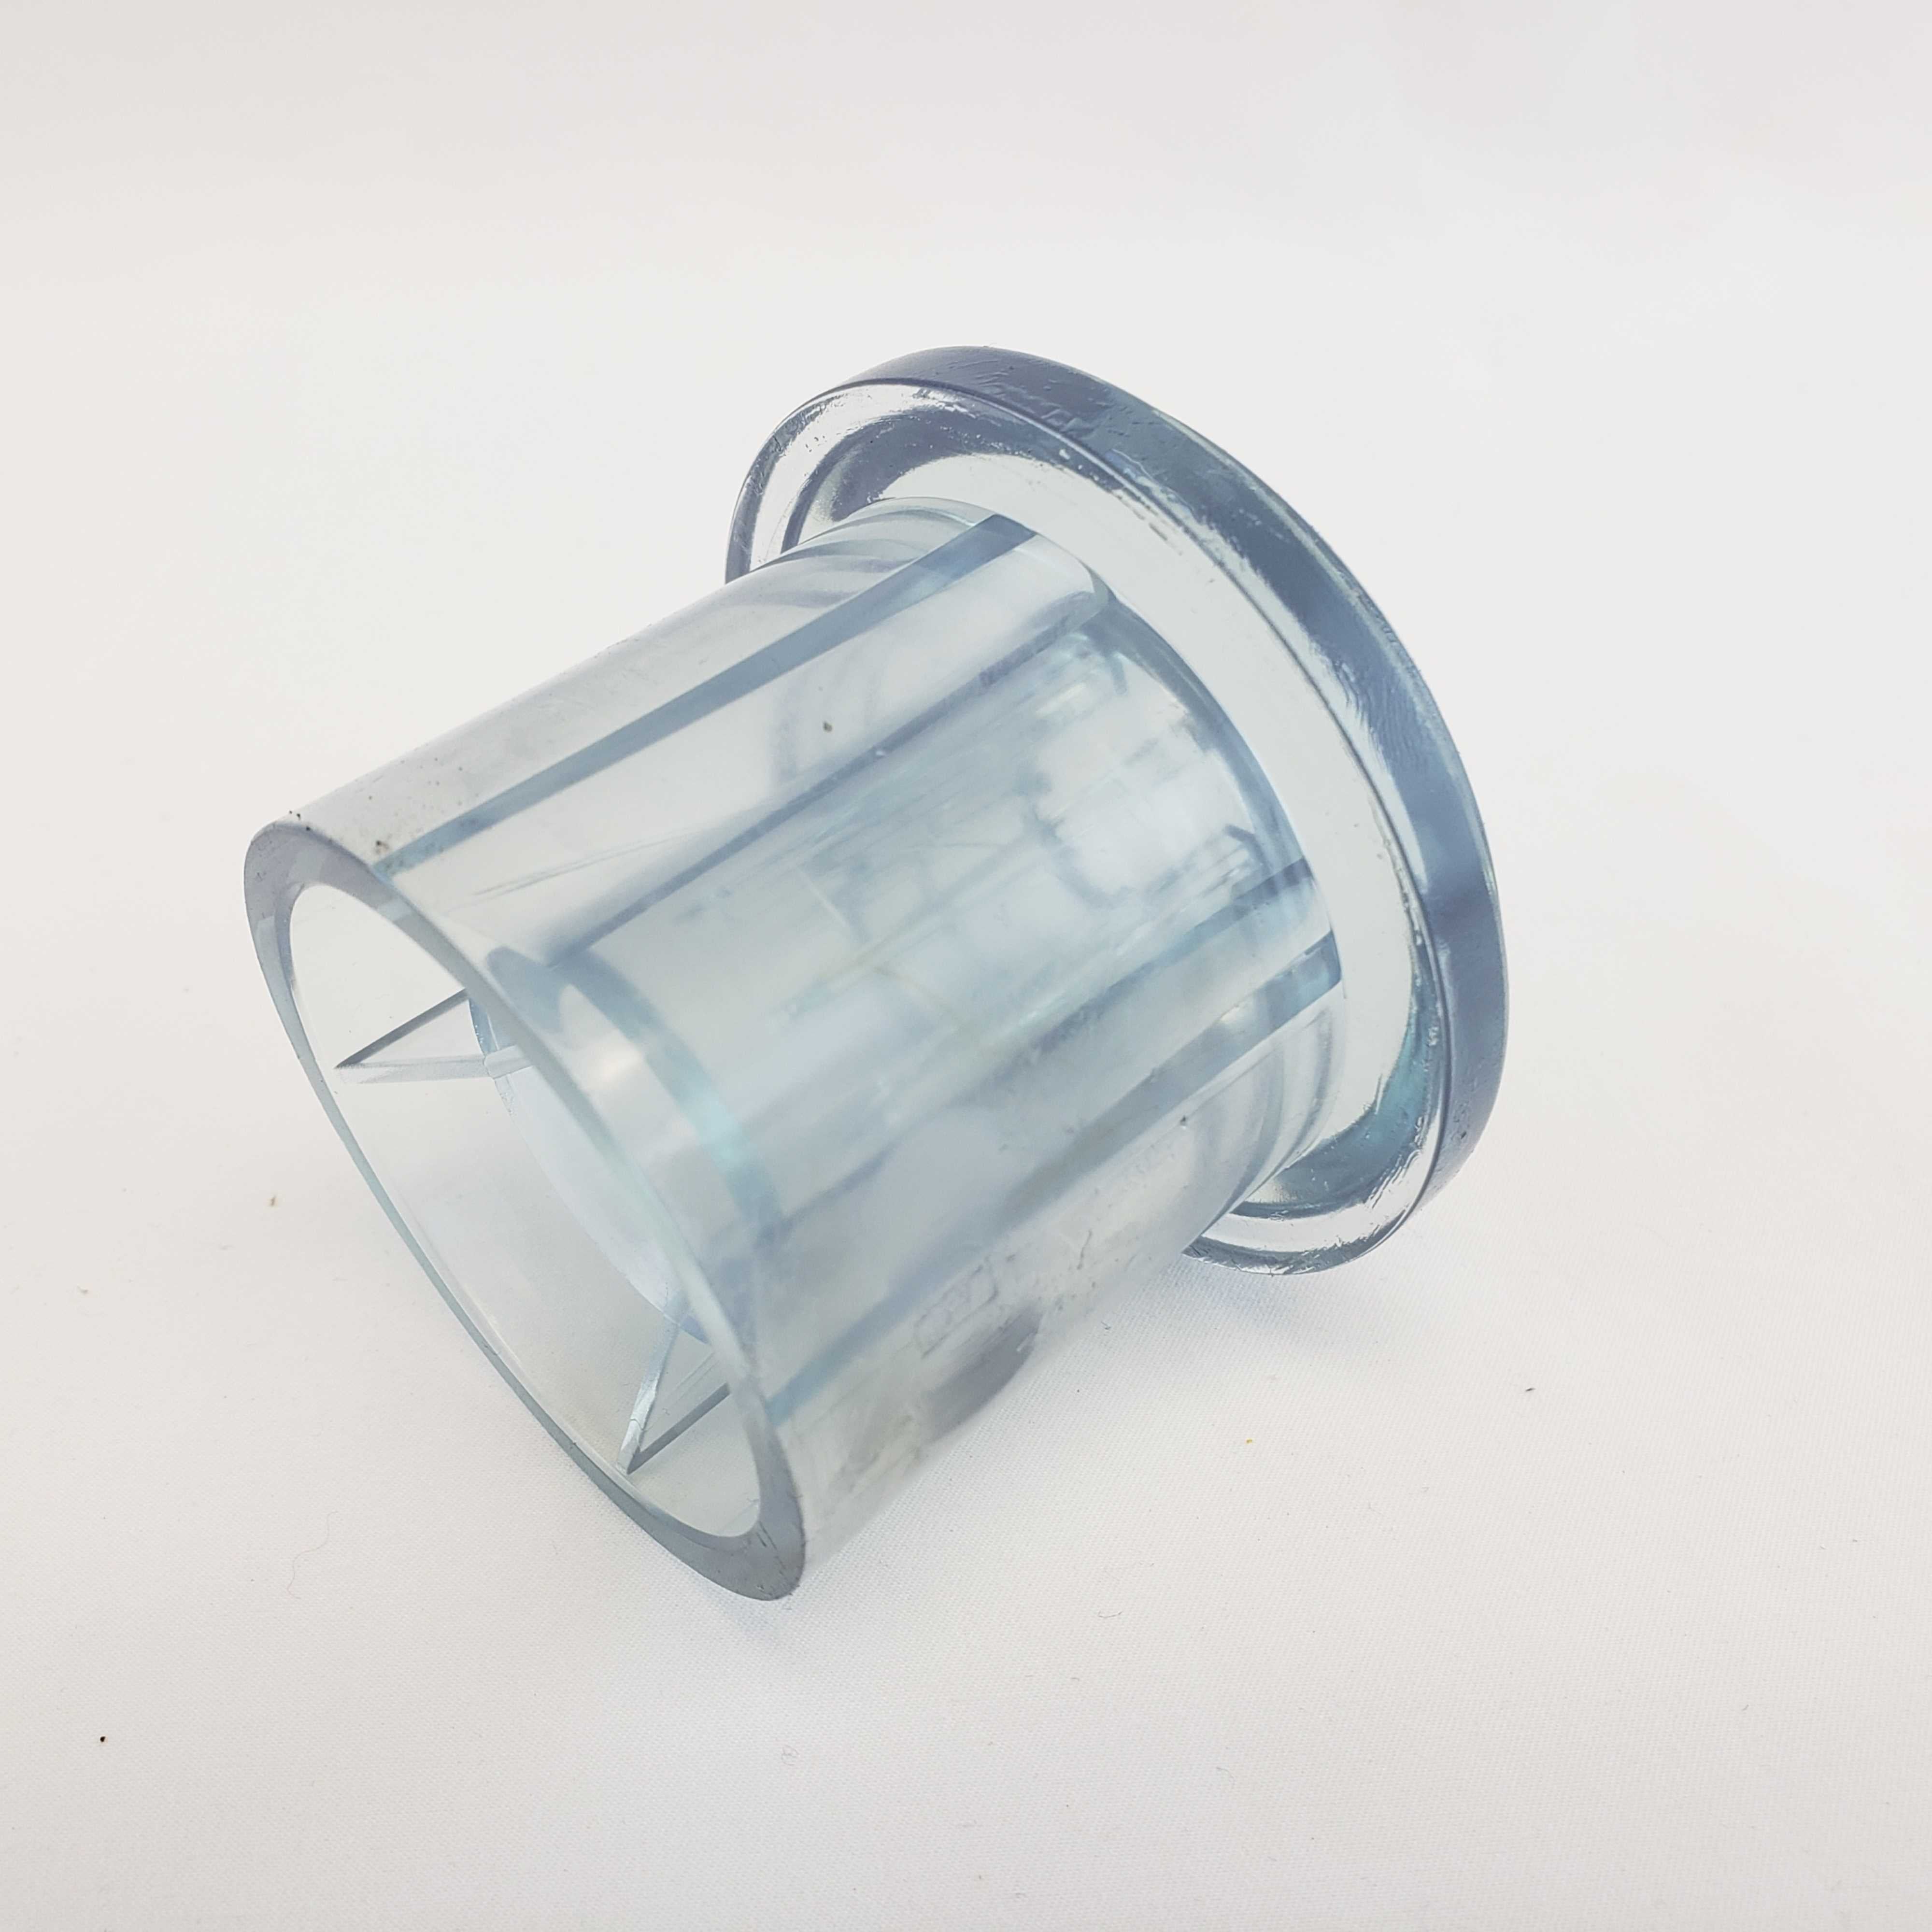 UV END CAP PVC CLEAR PLASTIC for all 3